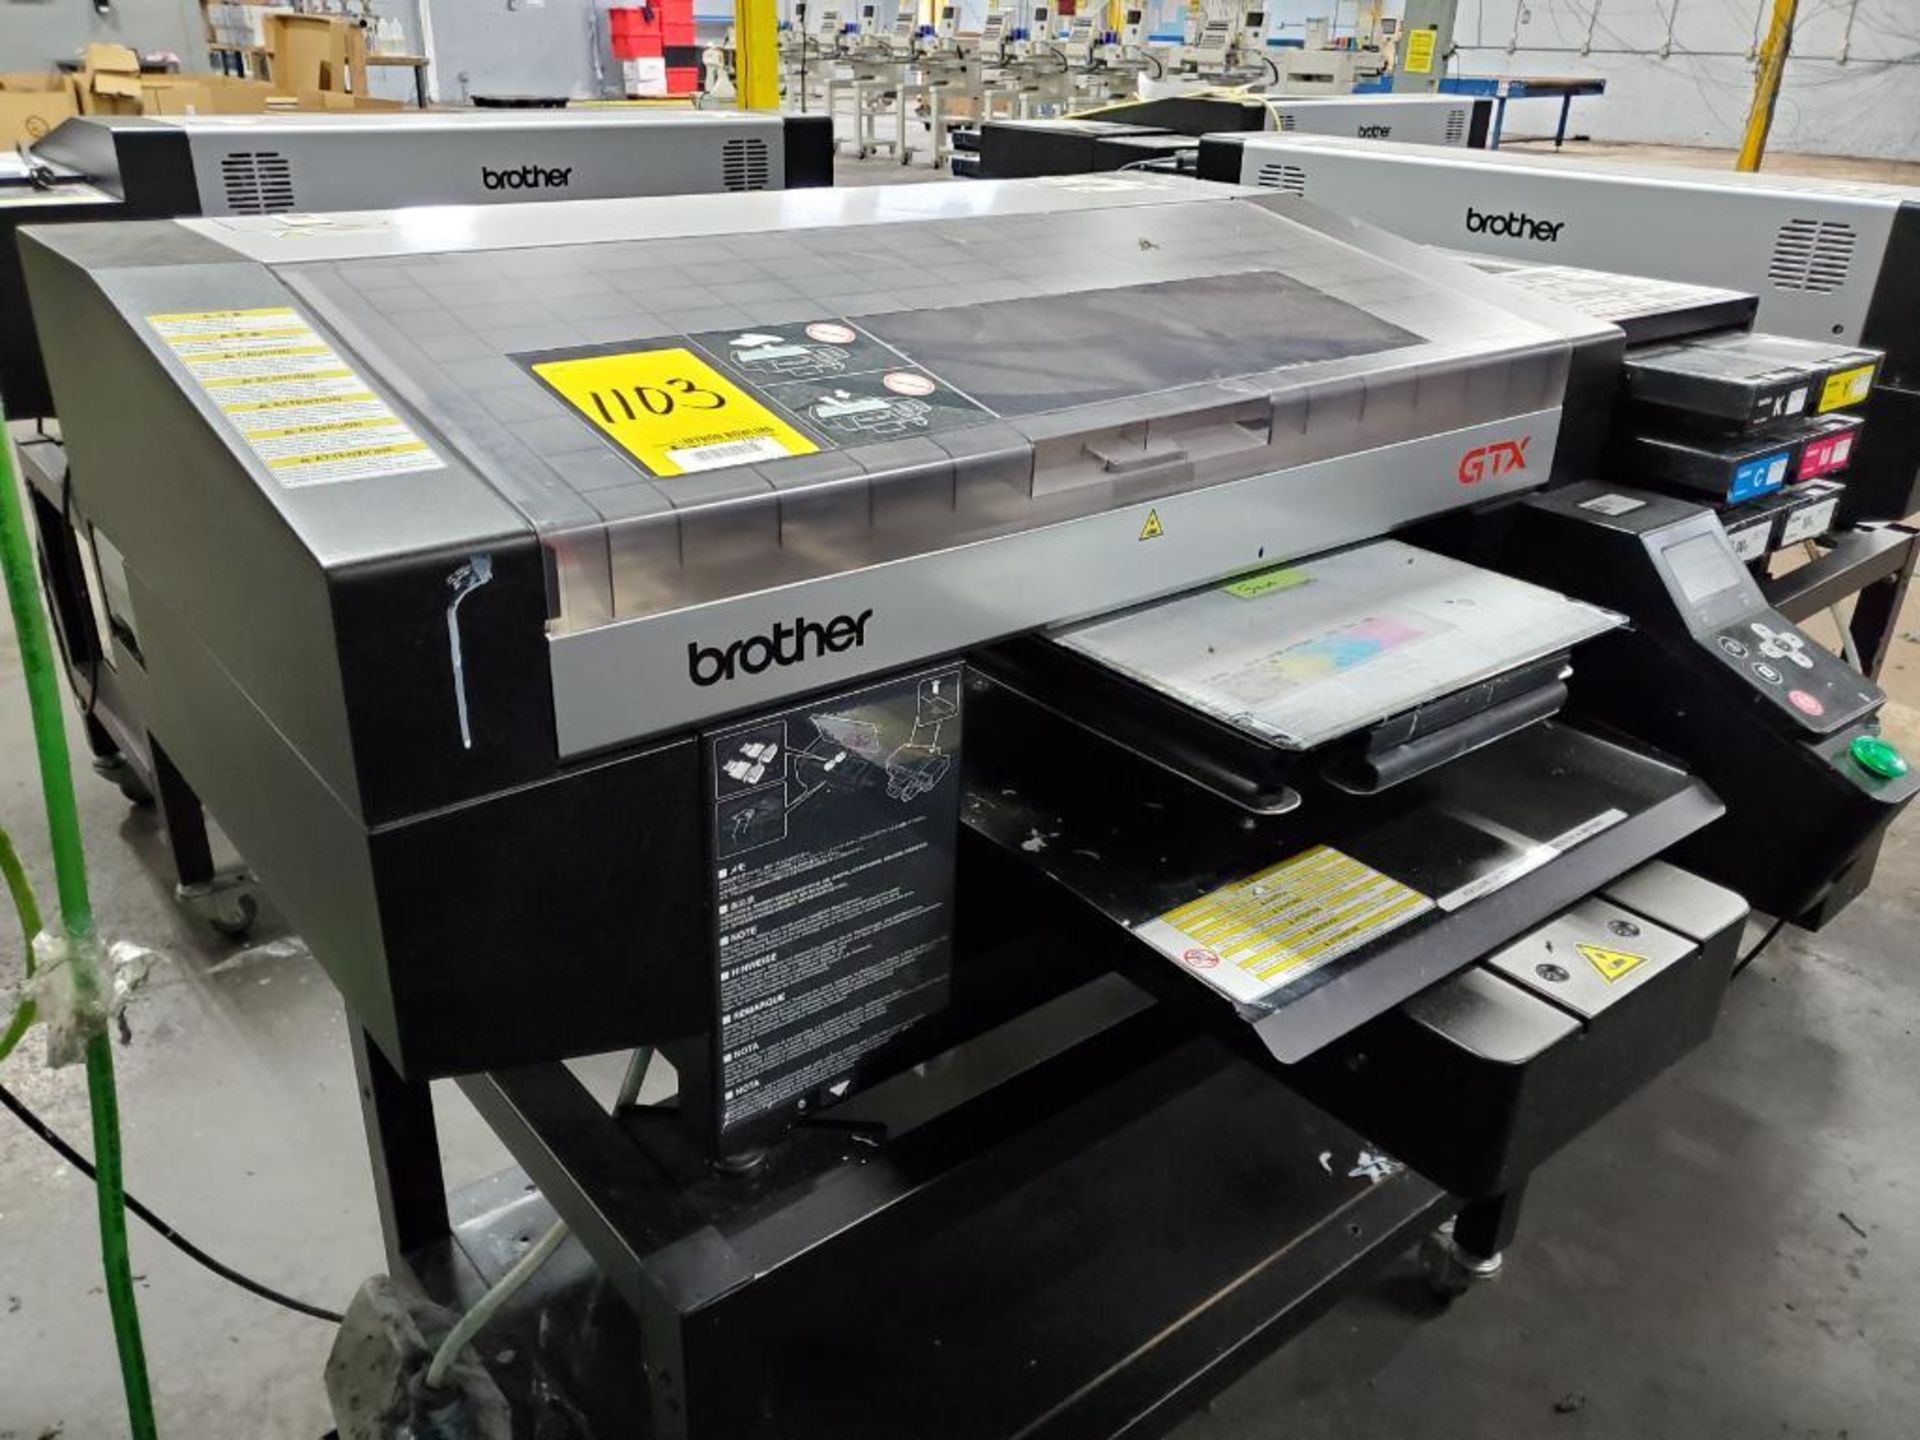 BROTHER GTX-422 GARMENT PRINTER, S/N G9931652, 14-1/2'' X 16-1/2'' TABLE, (NO SCANNER), 63,427 TOTAL - Image 2 of 6